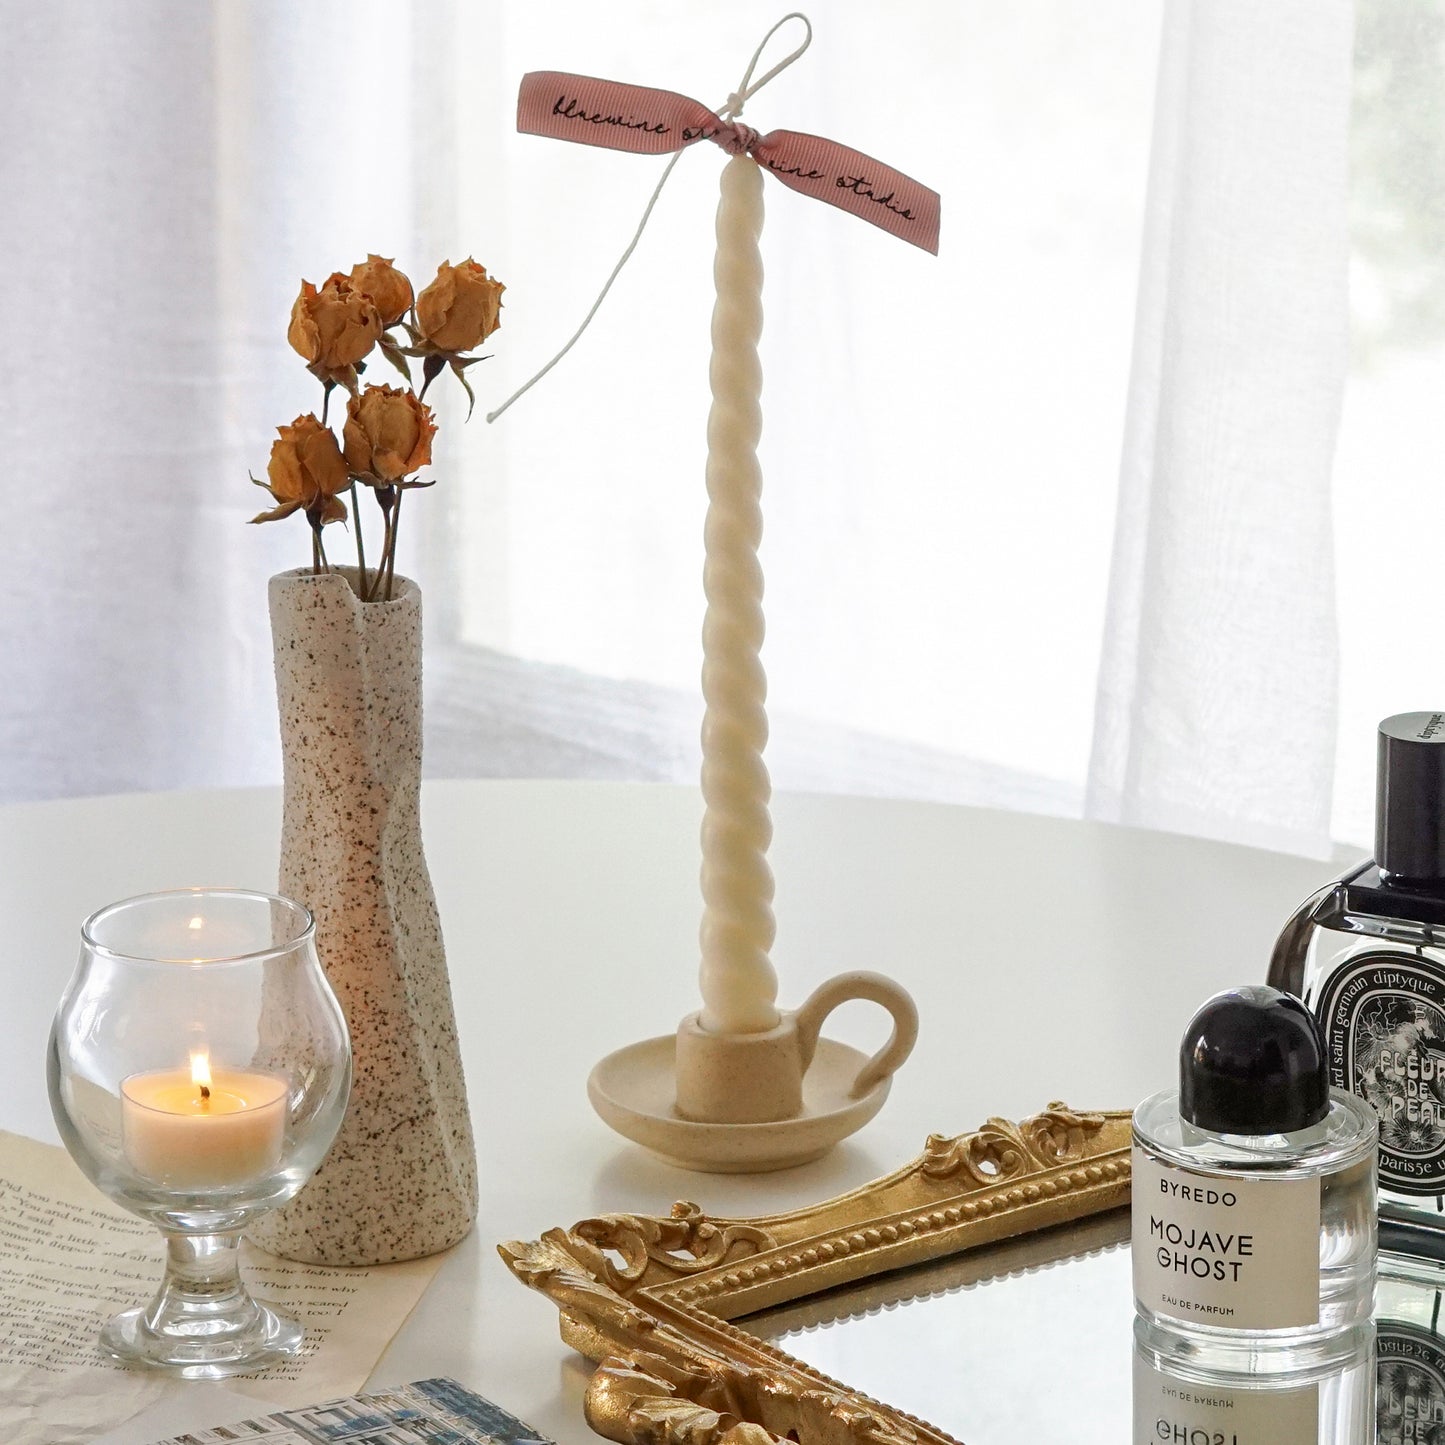 white twisted swirl soy pillar taper candle in a dotted beige ceramic candle holder, yellow rose dried flowers in a dotted ceramic unique vase and a lit tealight candle in a mini glass placed on book pages, and Byredo Mojave Ghost and Diptyque Fleur de Peau placed on rectangular gold french mirror tray on white round table